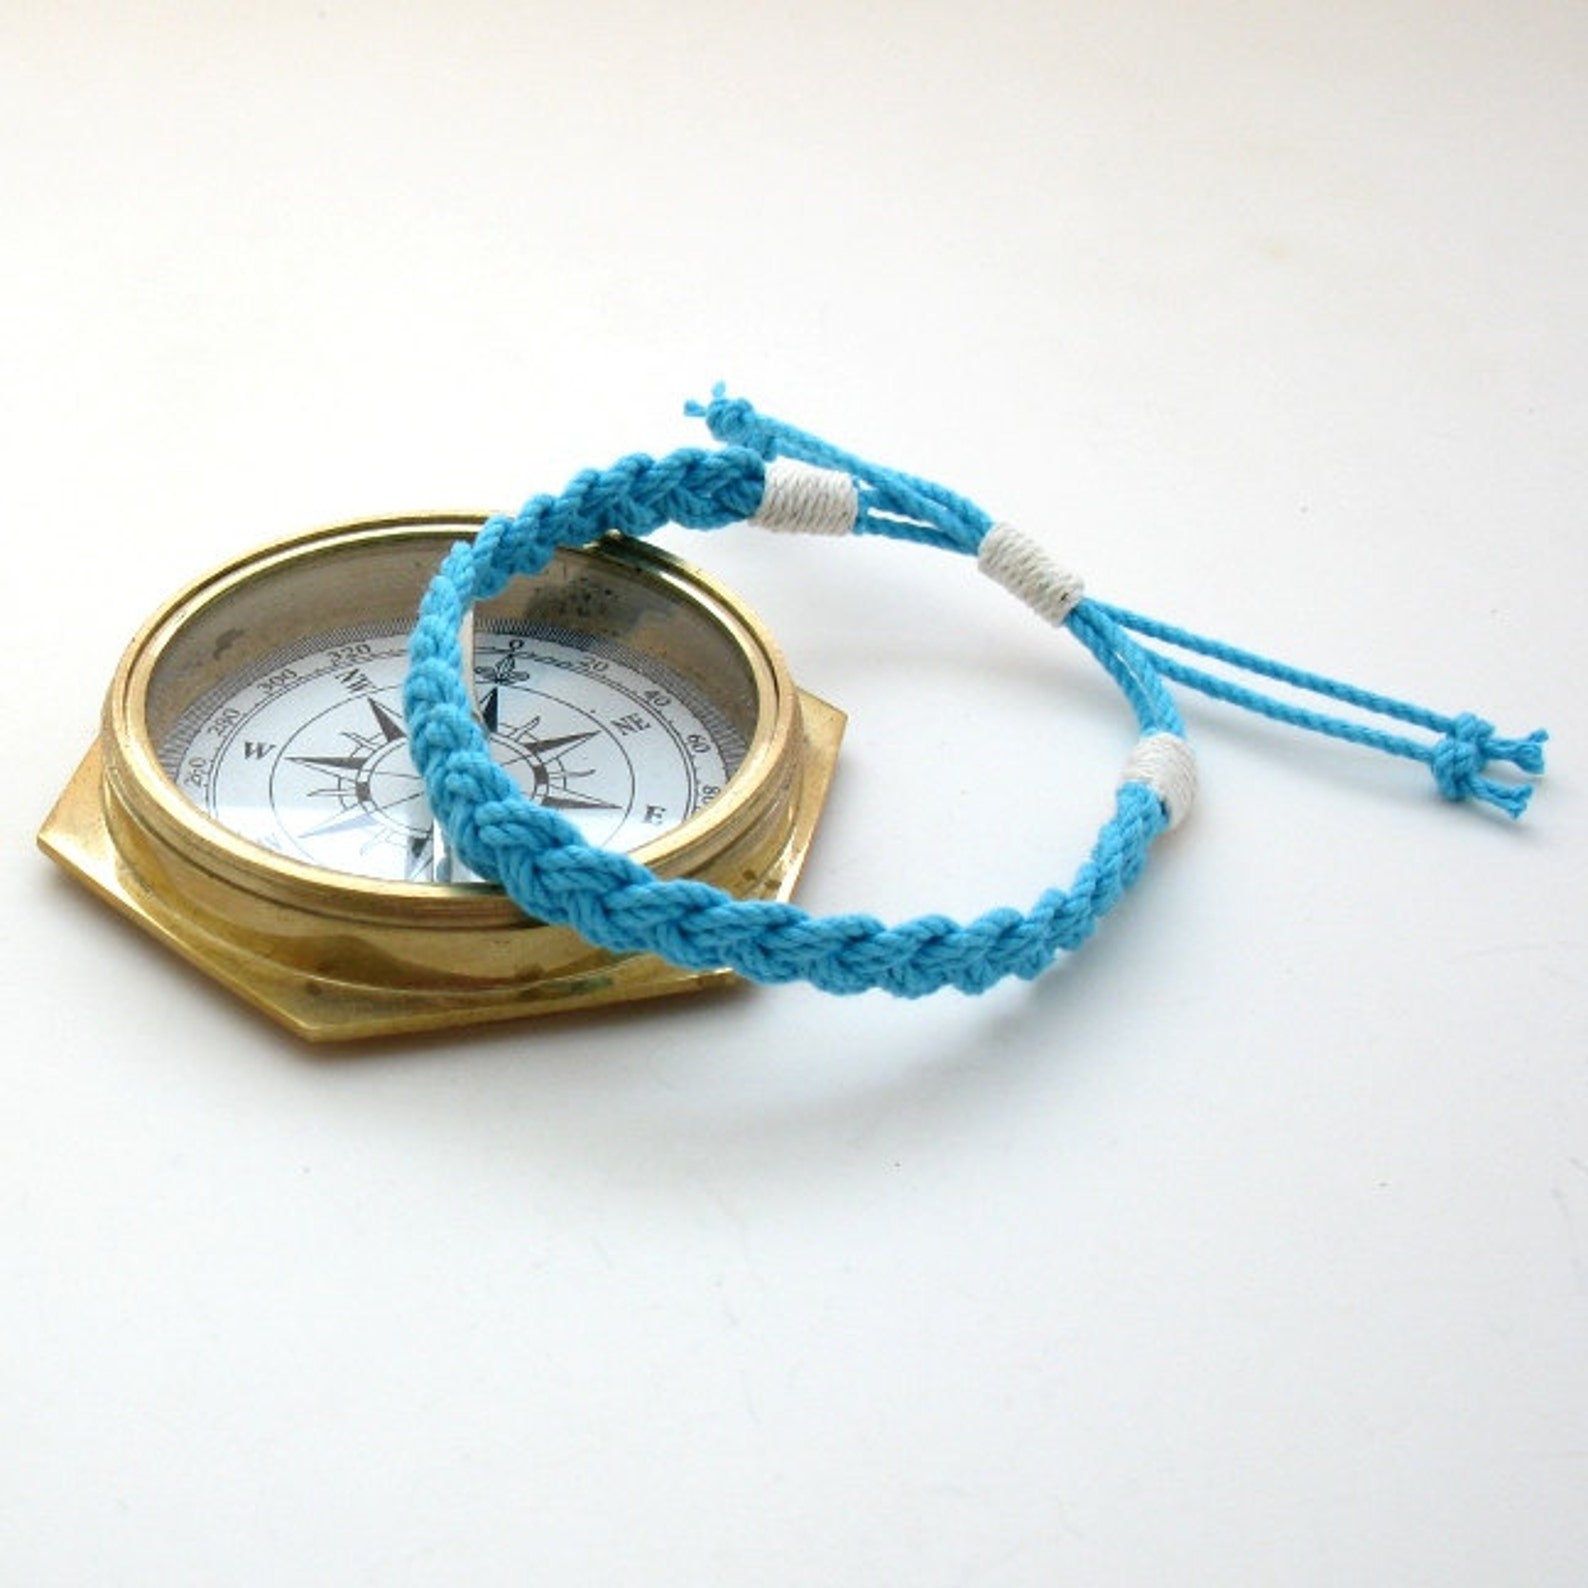 A turquoise anklet set on a compass.